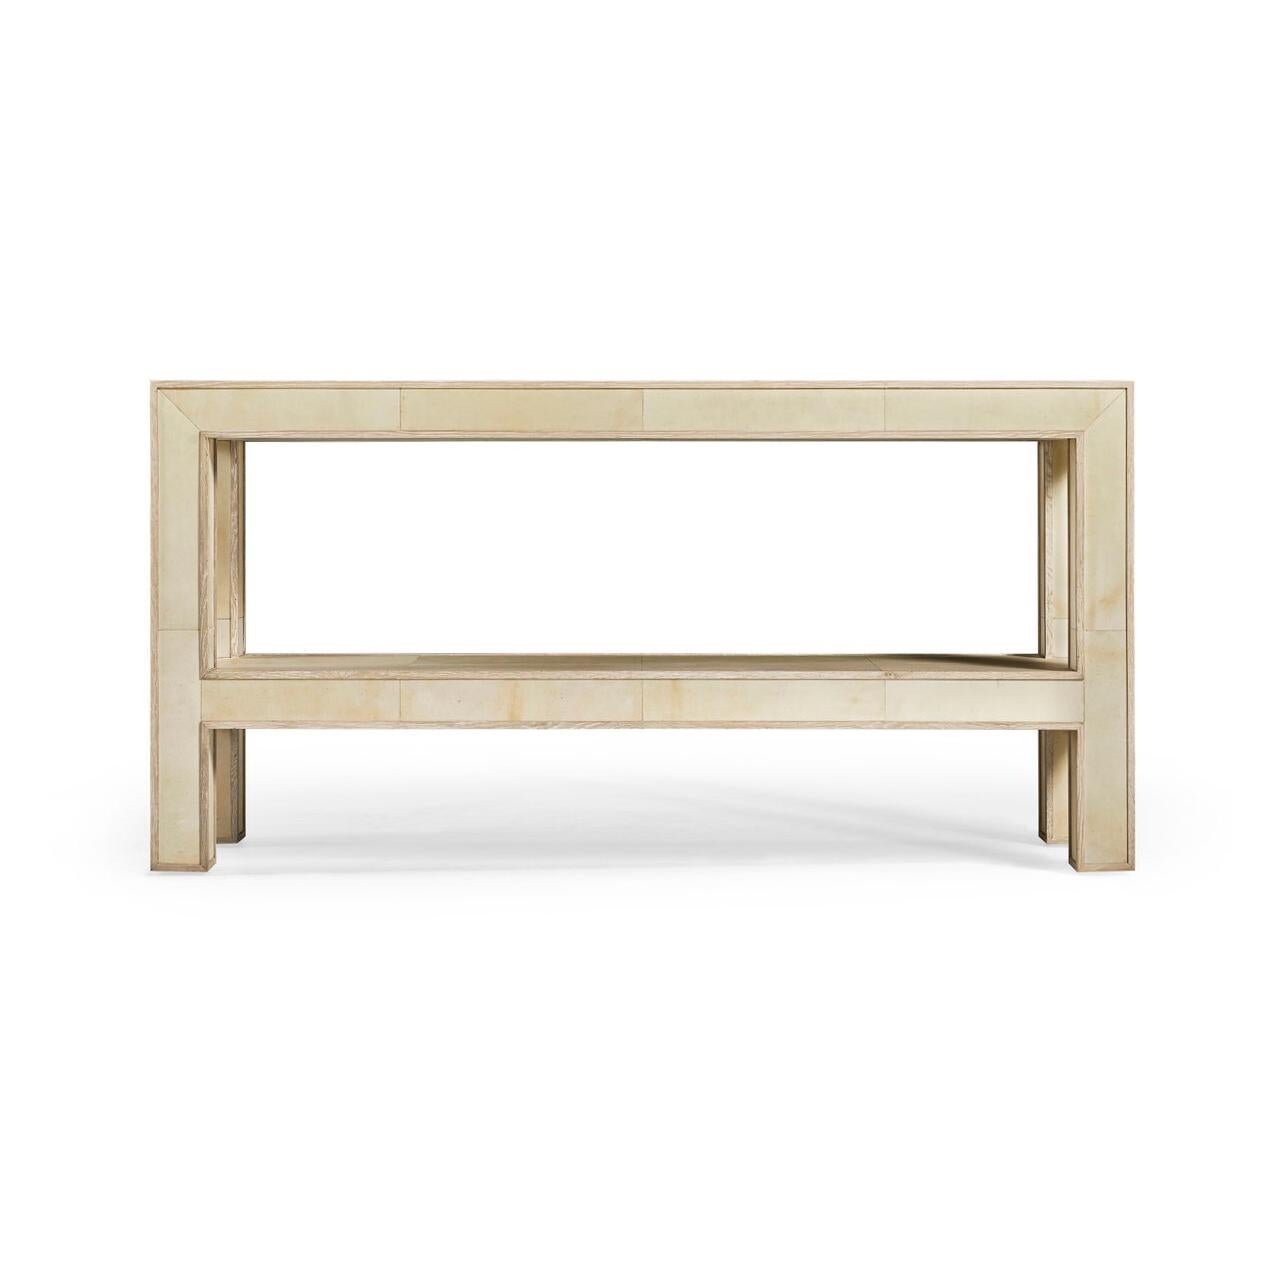 
A testament to refined craftsmanship and minimalist design. With its oak frame, this console exudes both strength and grace.

The surface is a tapestry of genuine, untreated parchment squares, carefully sealed with a clear coat for a durable